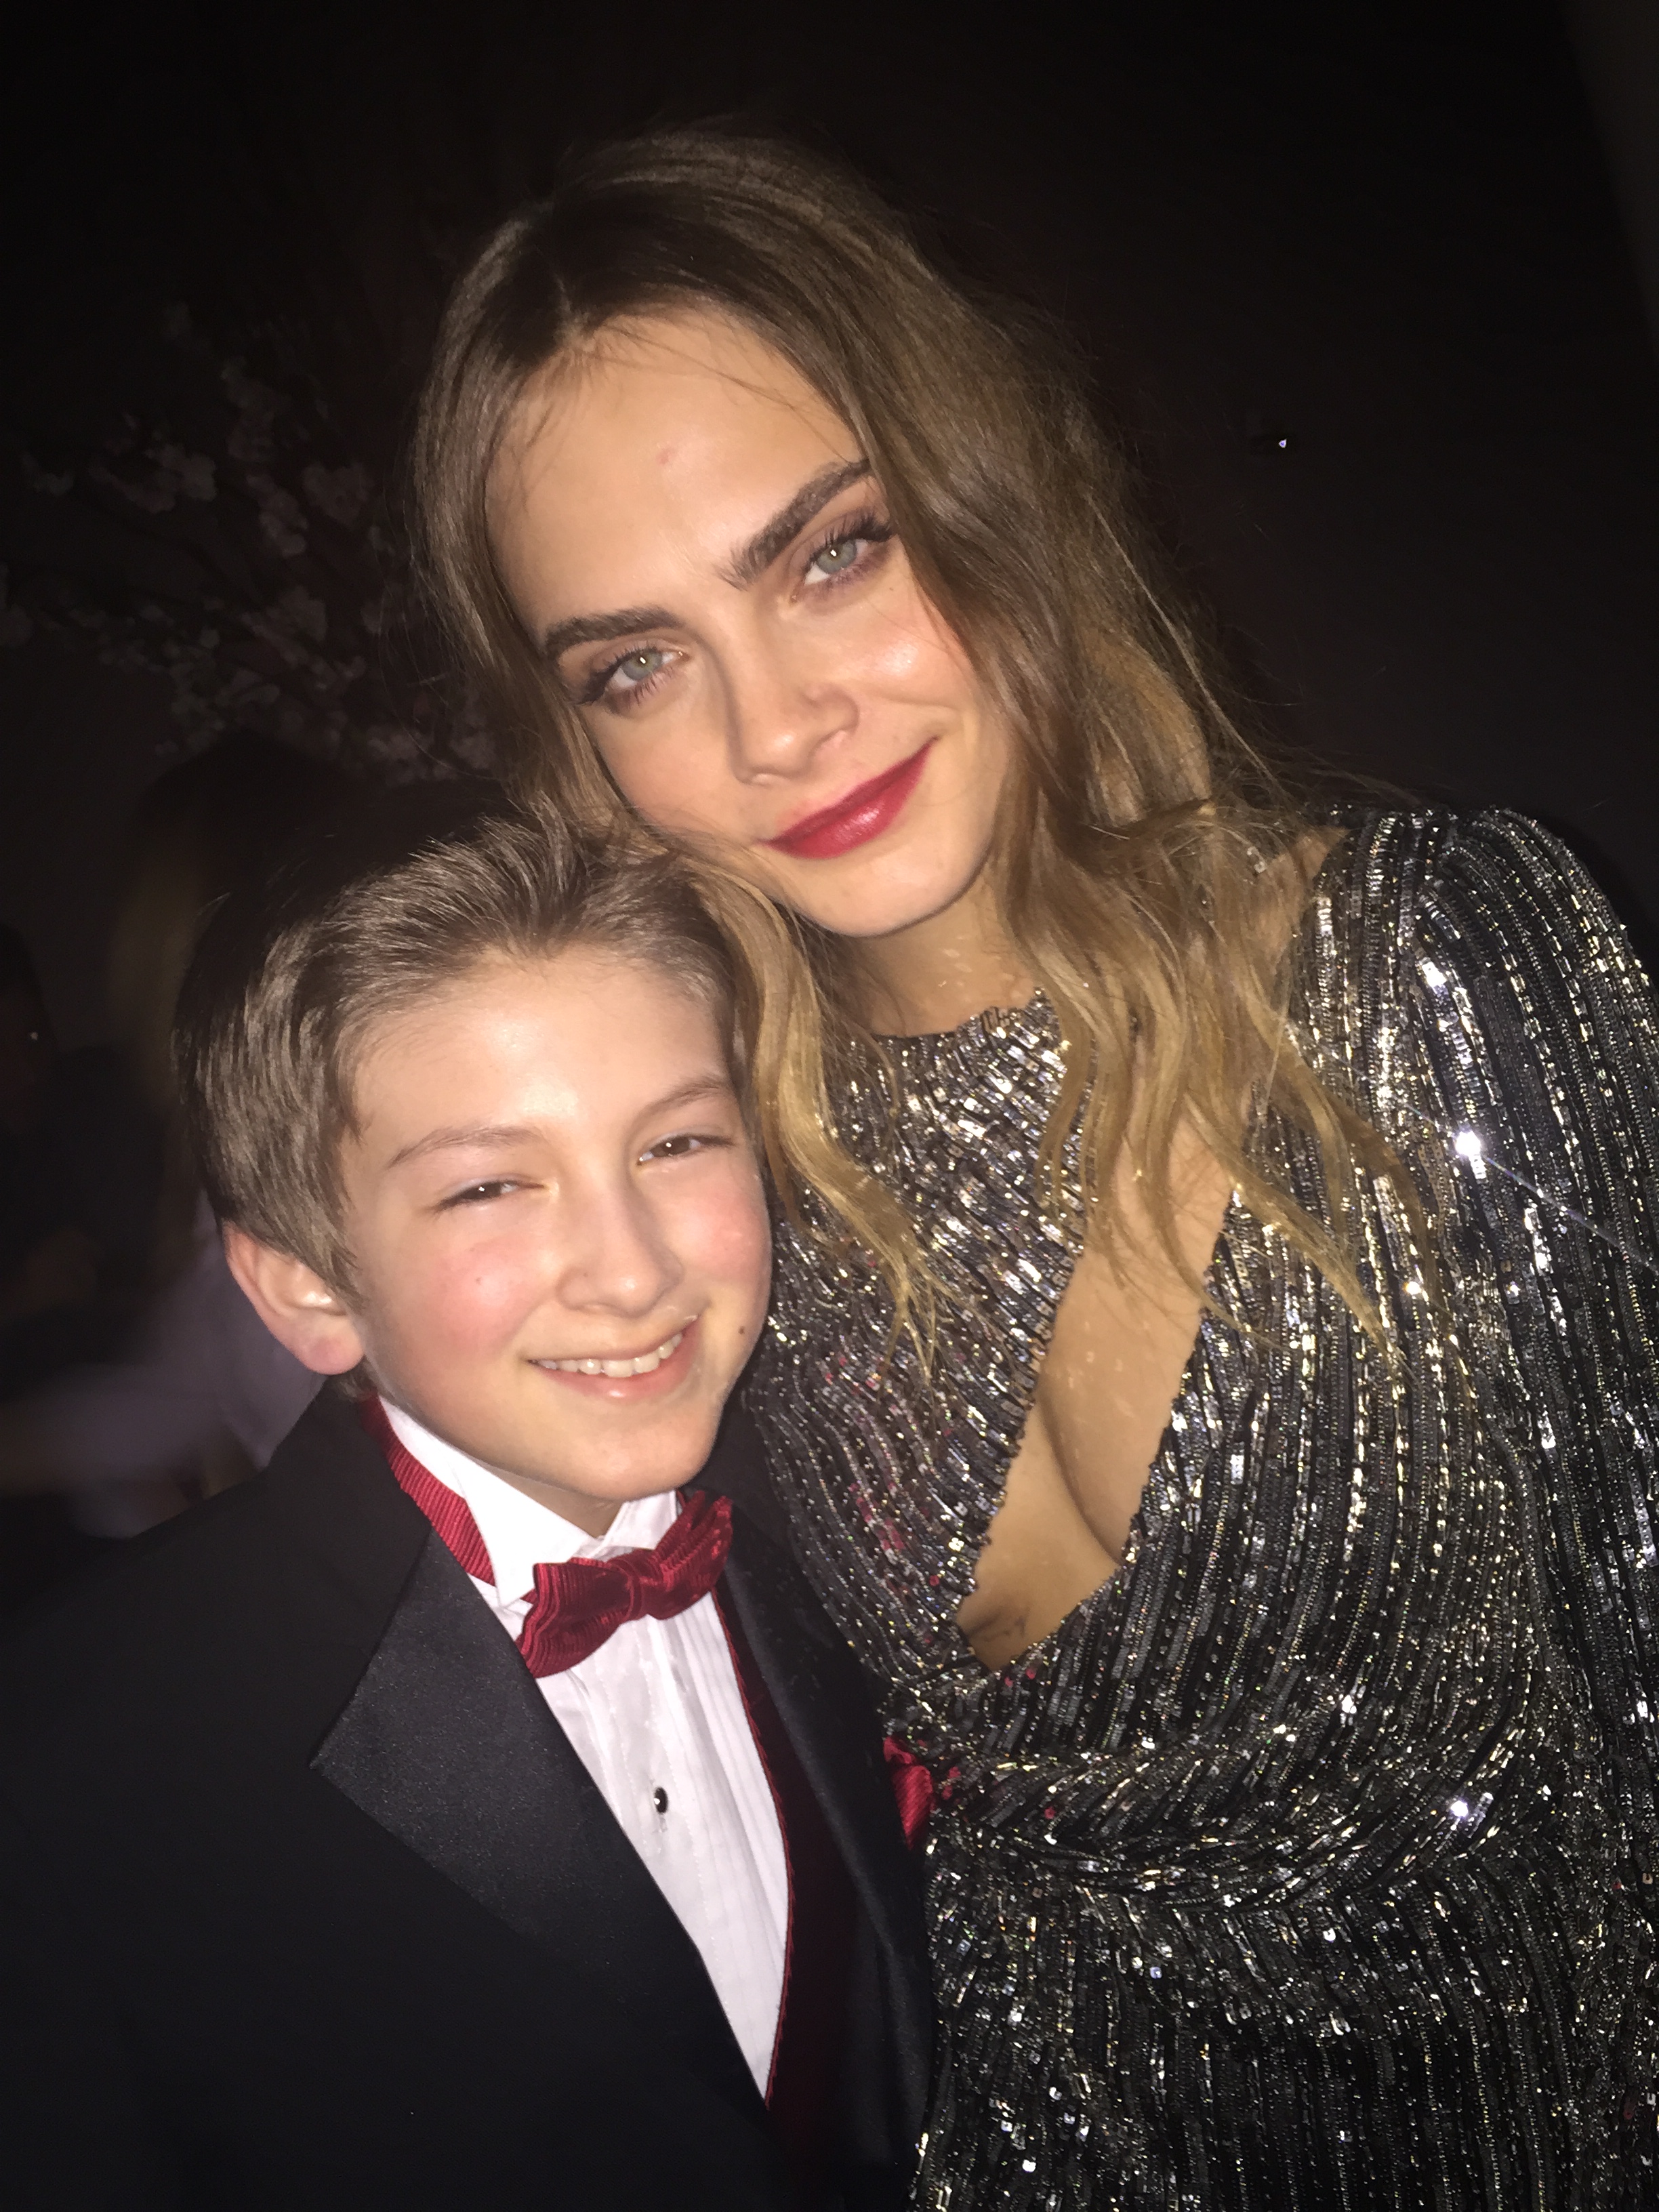 Josiah Cerio with Cara Delevingne Paper Towns Premiere NYC